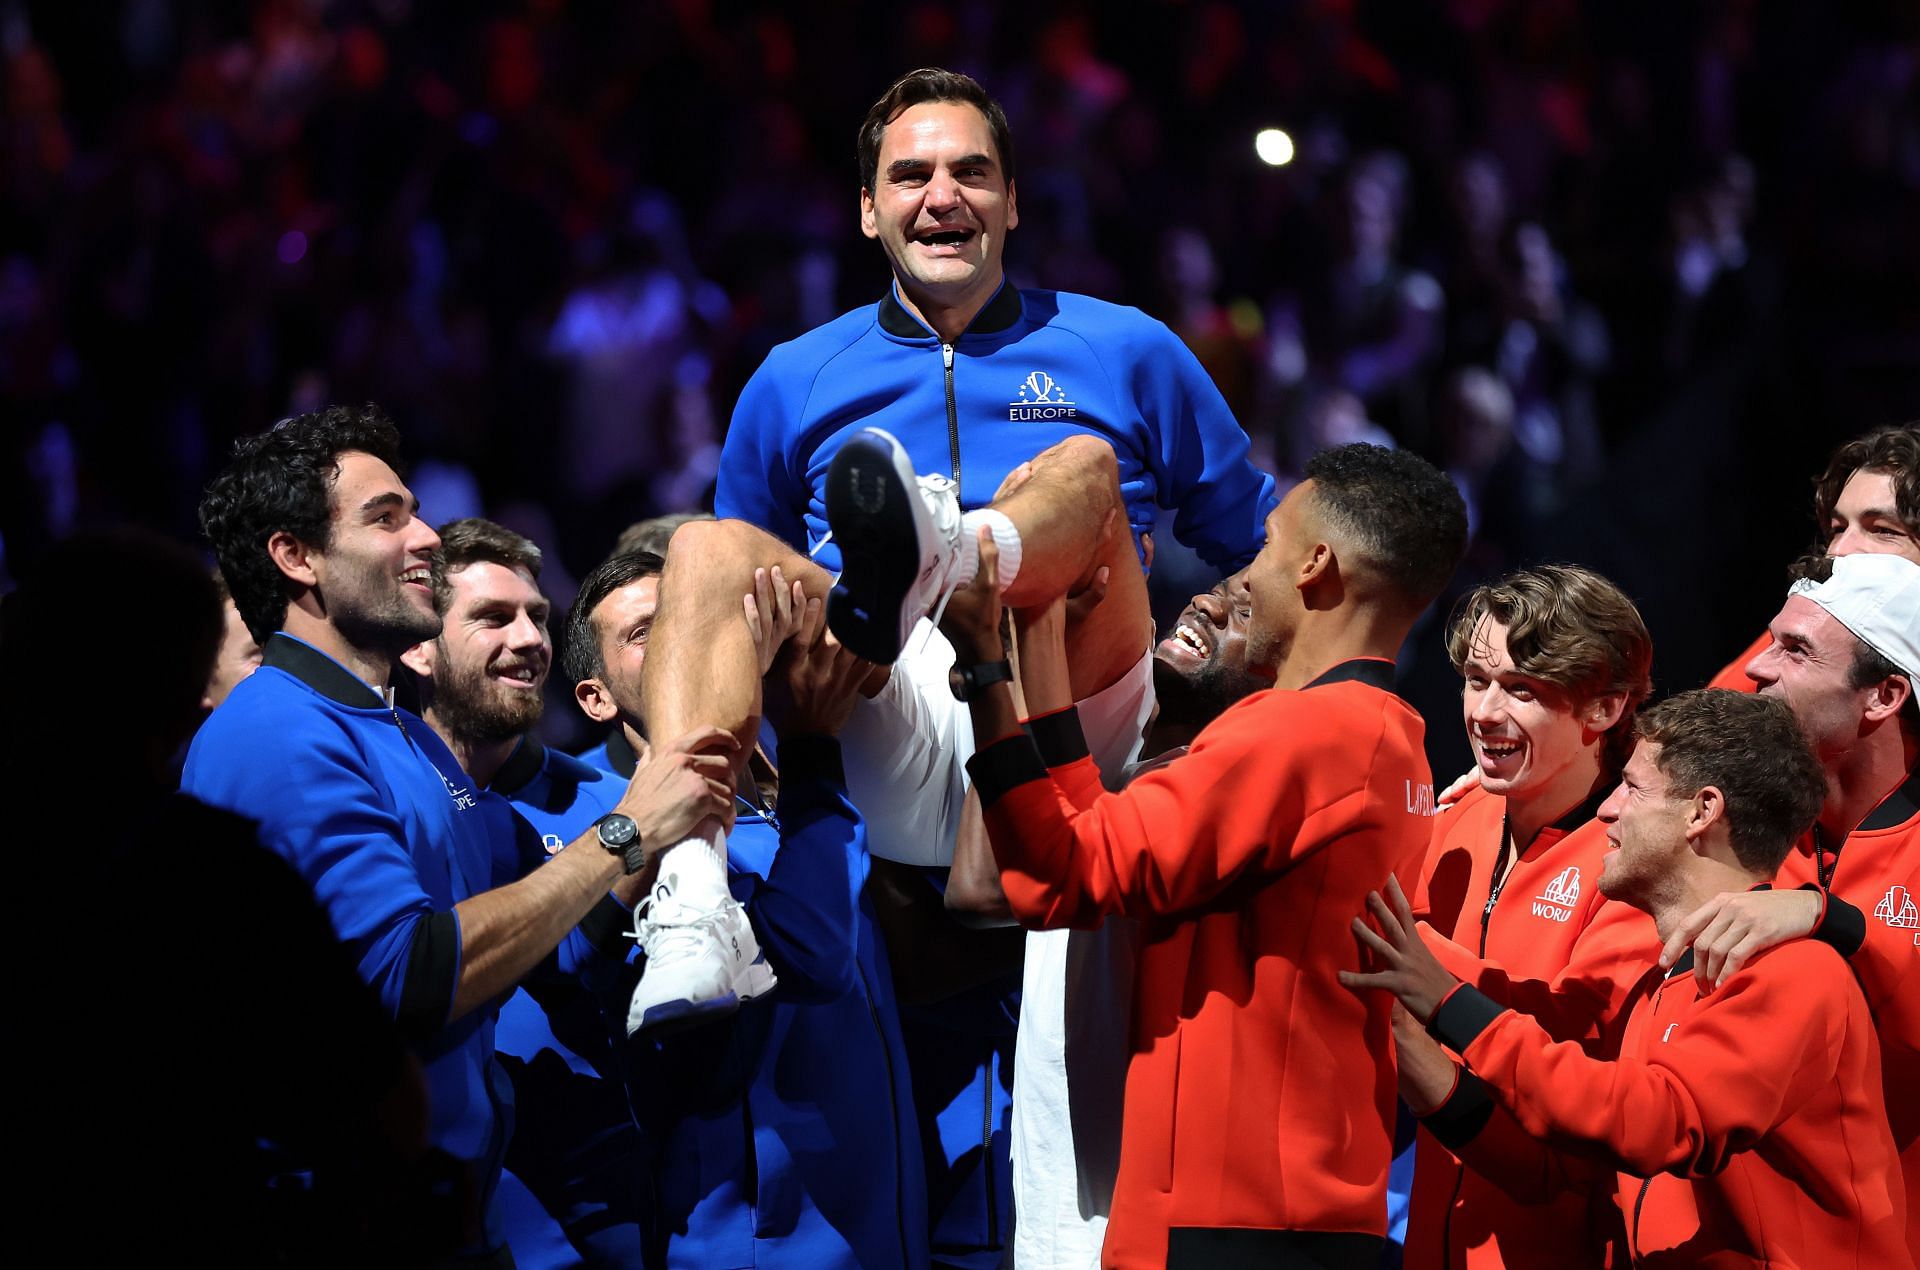 Federer being lifted up by his teammates and members of Team World